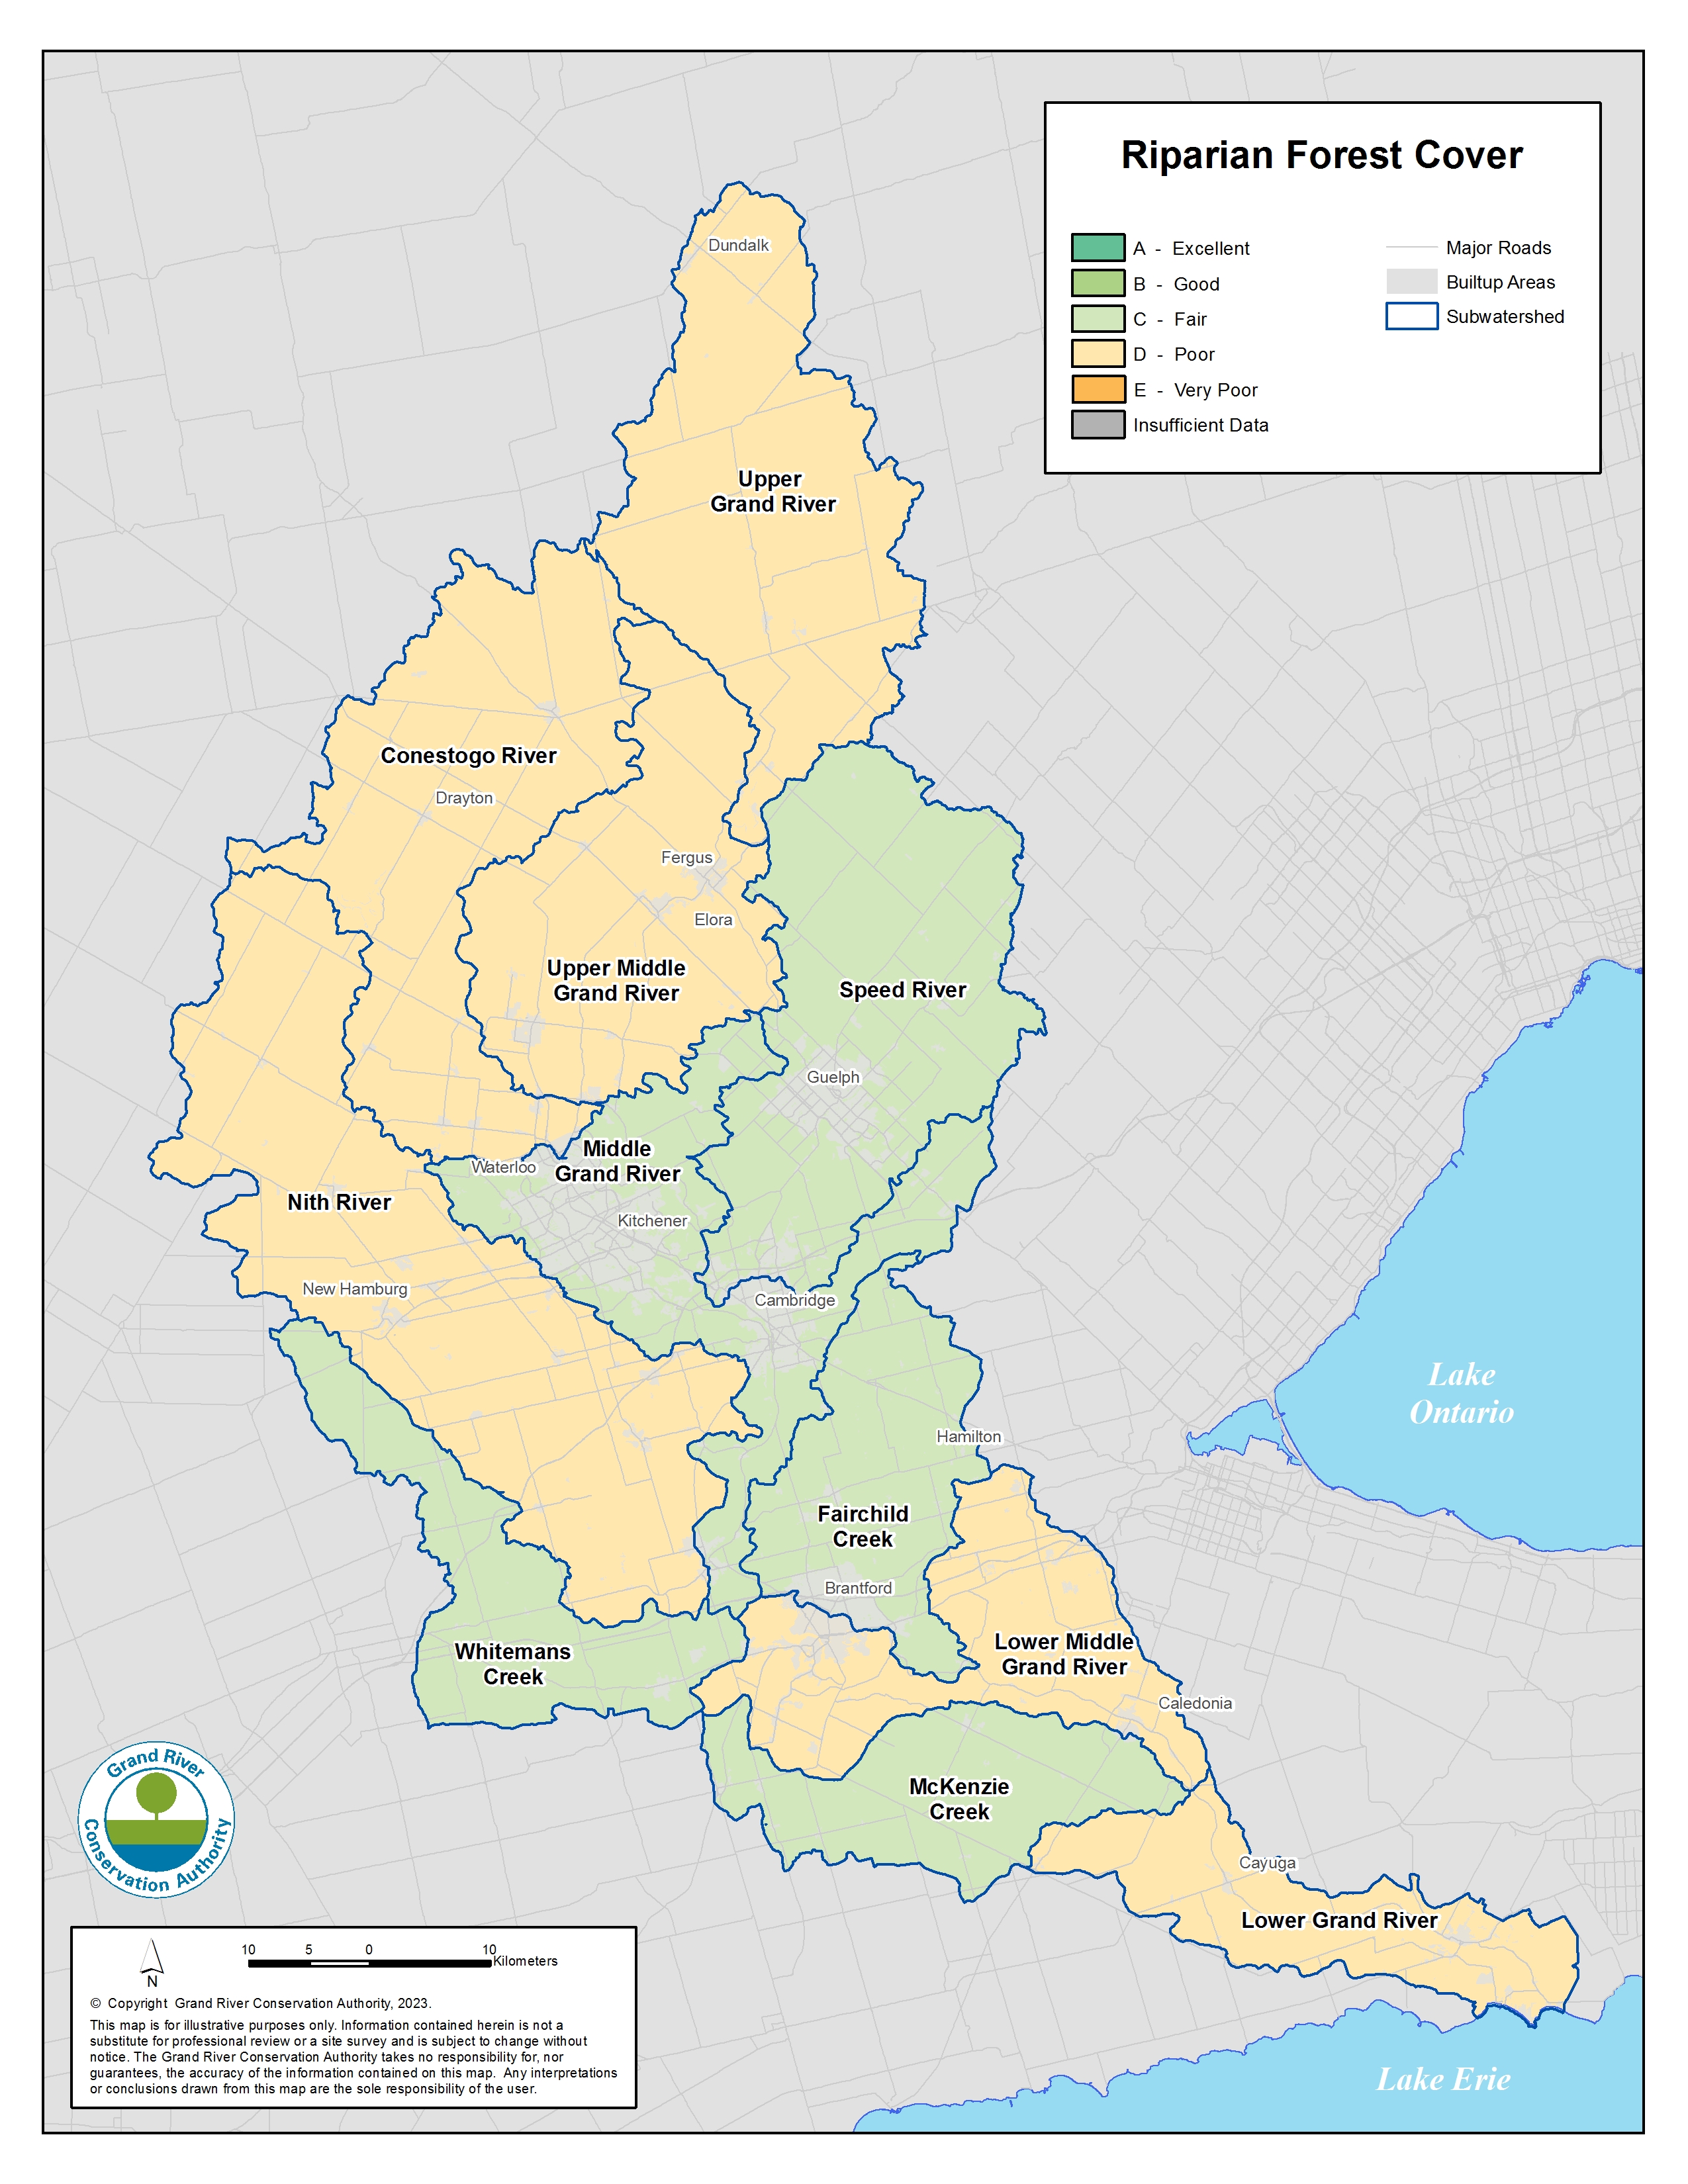 A map of letter grades for riparian forest conditions. The Fairchild Creek, Speed River, Middle Grand River, McKenzie Creek and Whiteman's Creek subwatersheds have a C grade while all others have a D grade. 